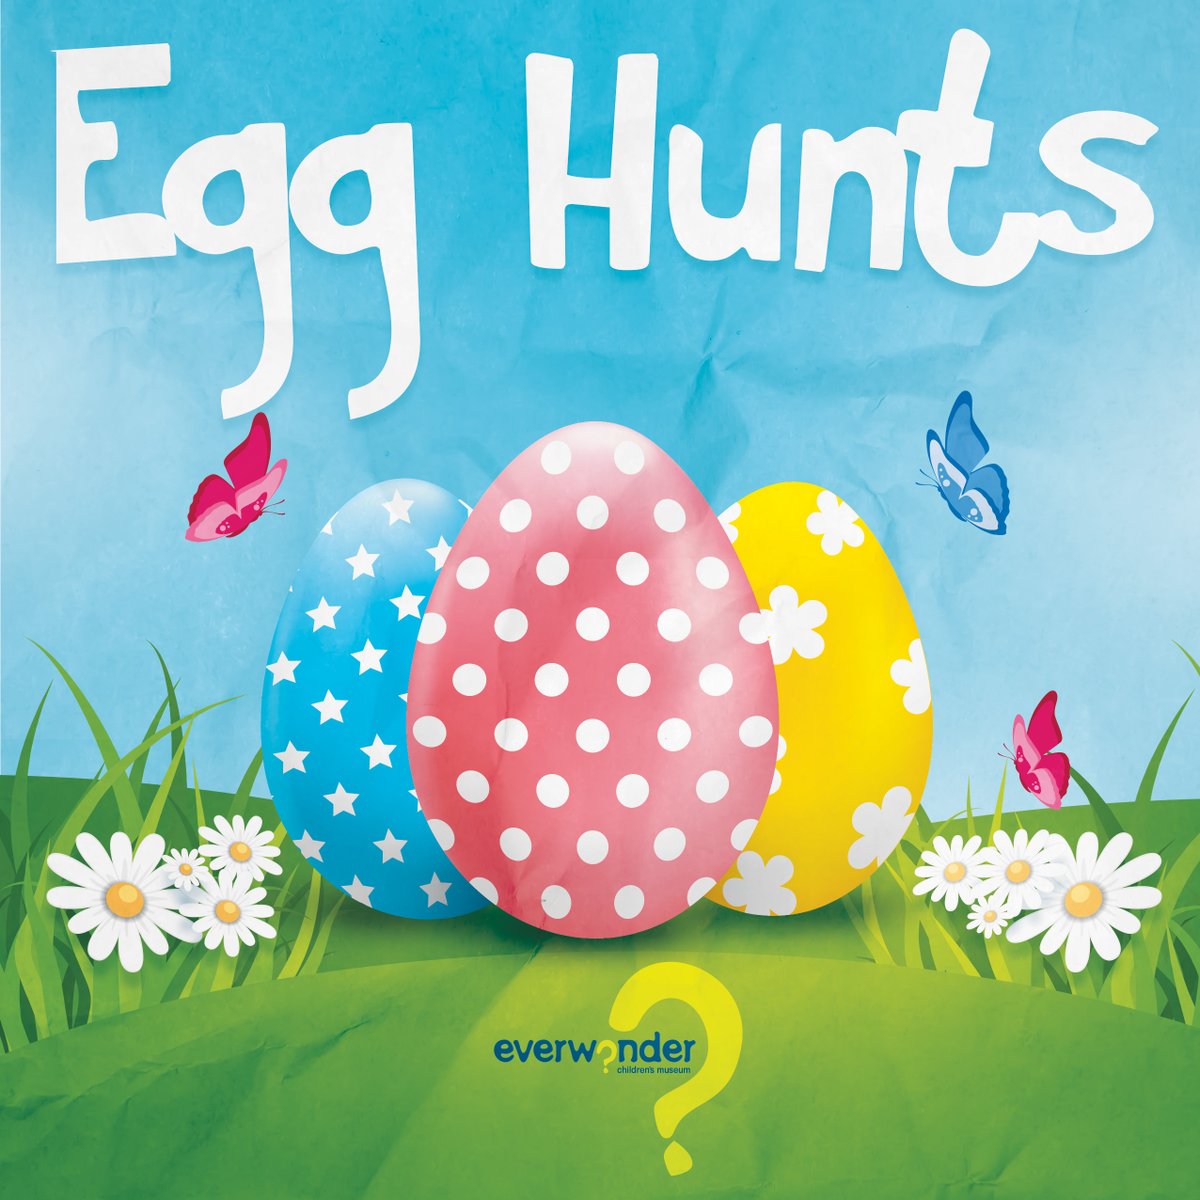 Chamber member @everwonderCM is hosting its Annual Egg Hunts this weekend. More details and other updates in the latest Chamber News - March 29, 2022 - mailchi.mp/newtown-ct/ncc…